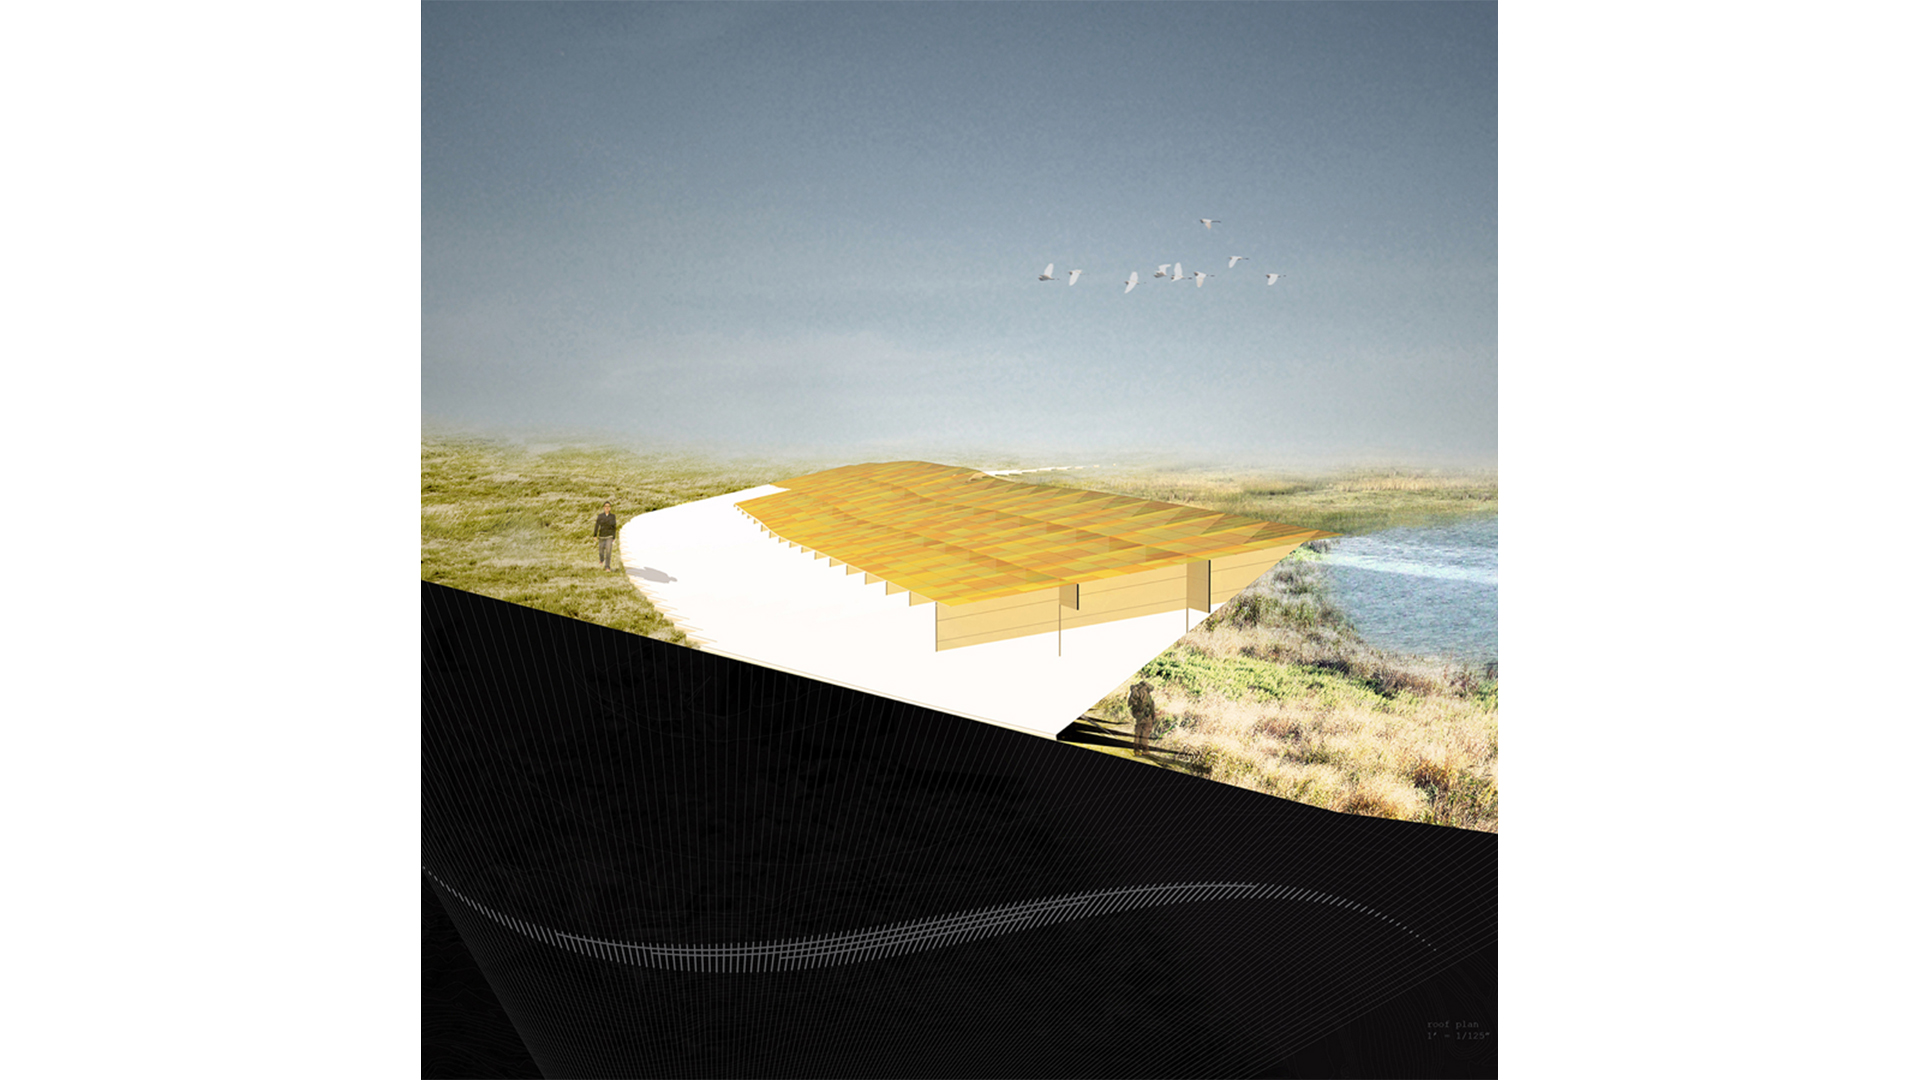 A section-perspective rendering of the proposed public installation (2012)